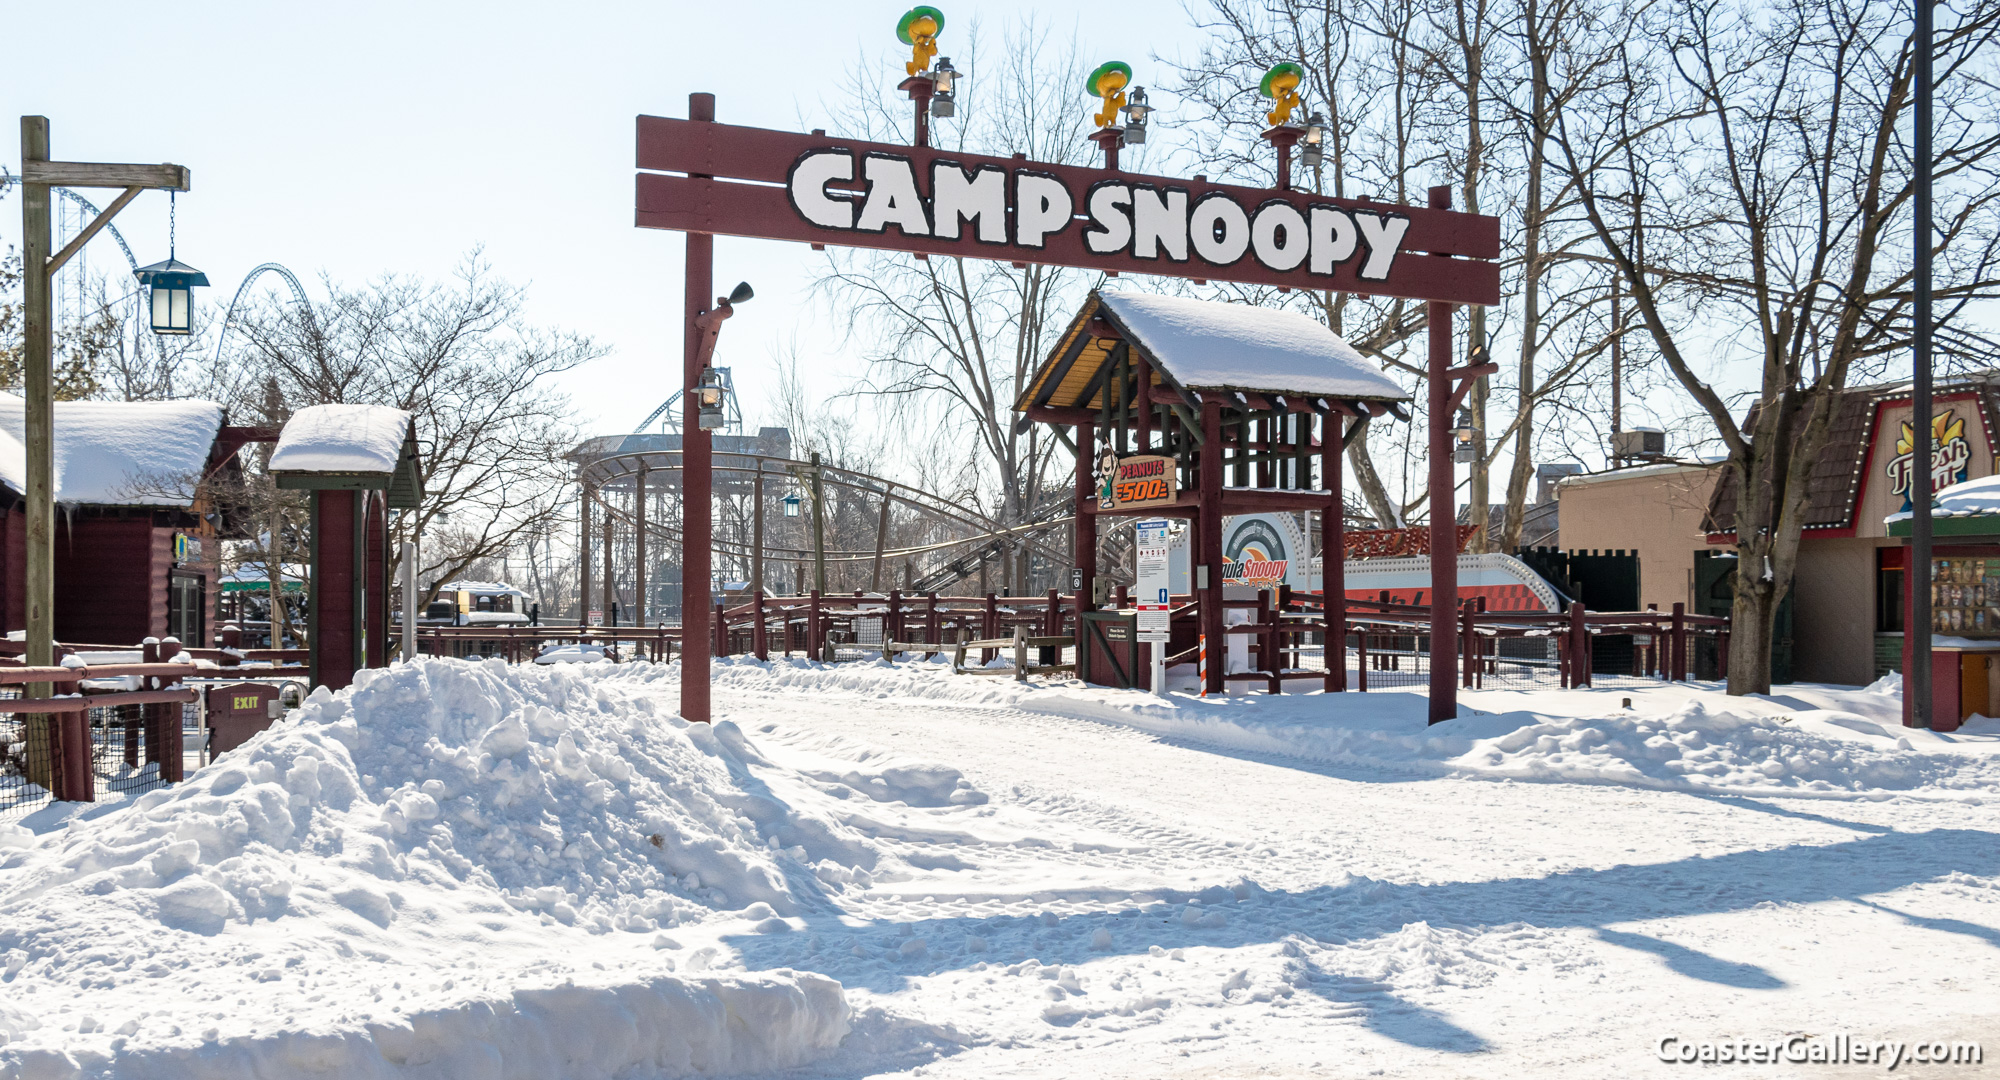 Woodstock Express - Camp Snoopy at Cedar Point